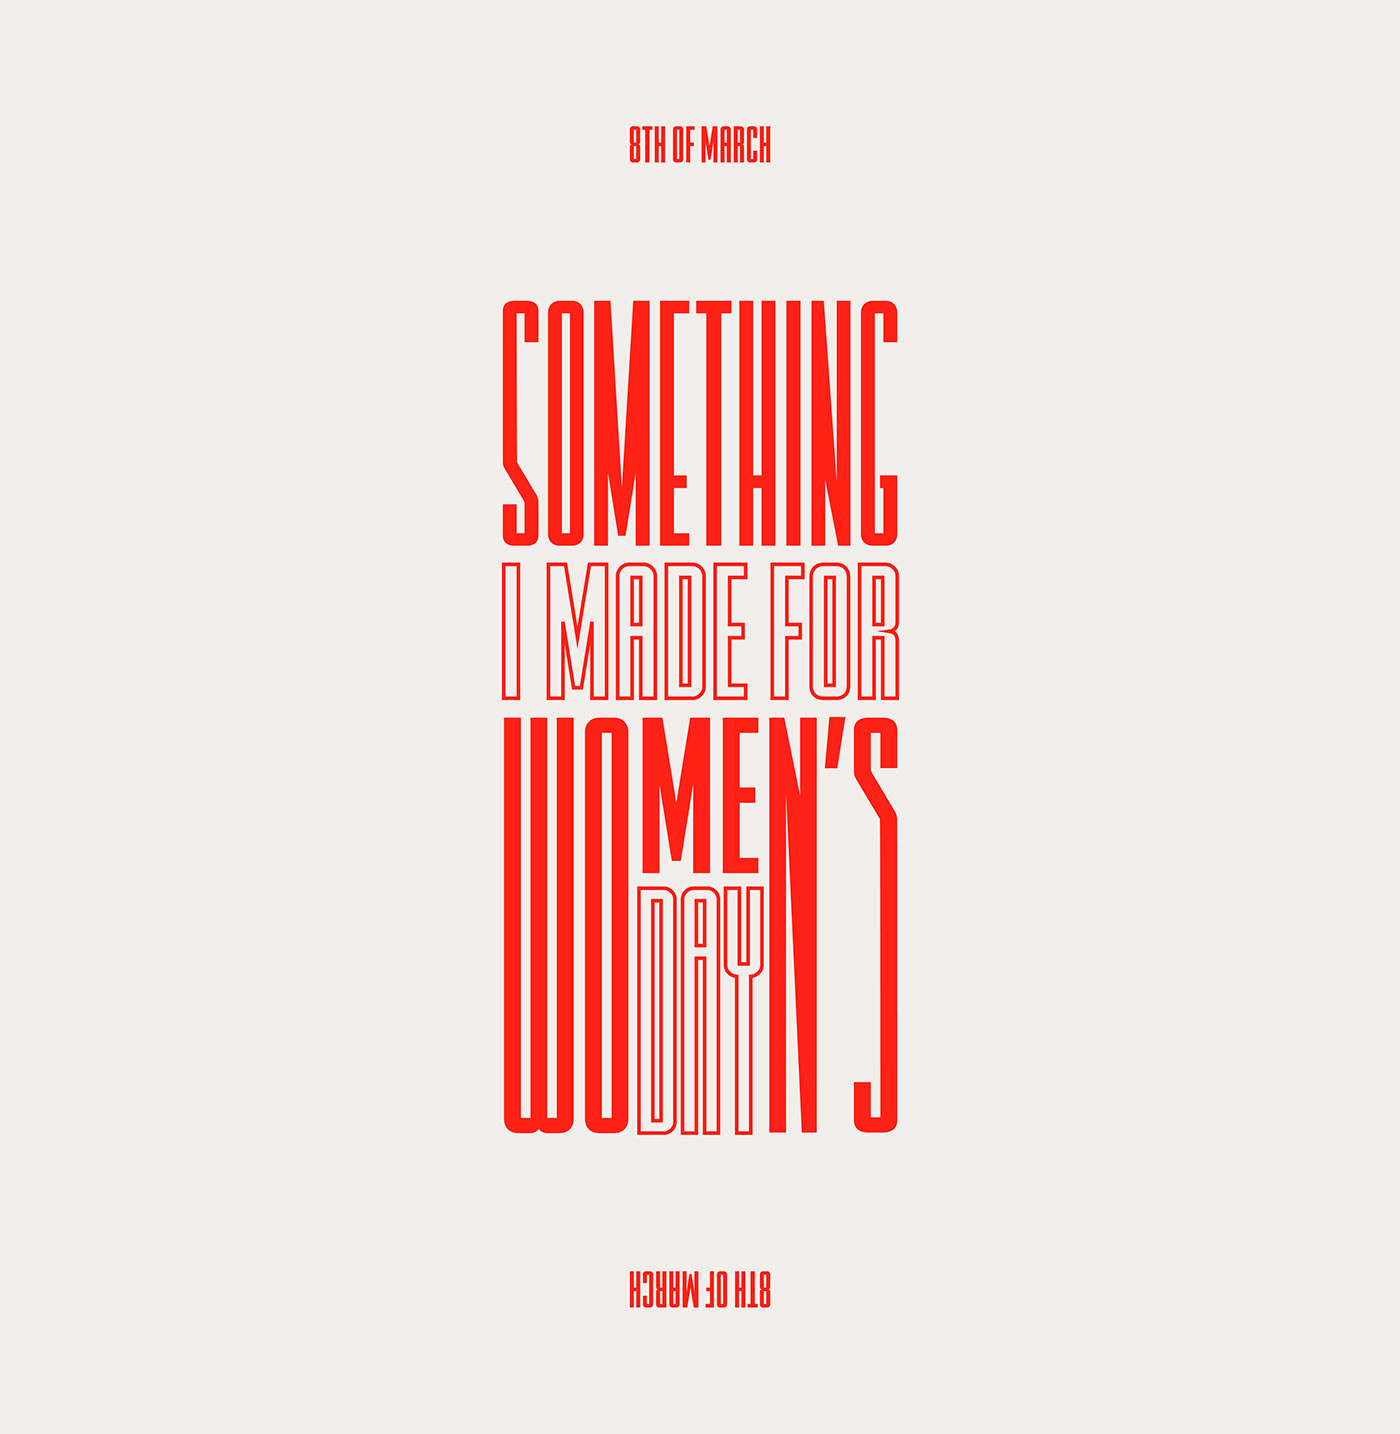 women womens day International Womens day bold distortion Typeface typographic Experimentation gif type extention